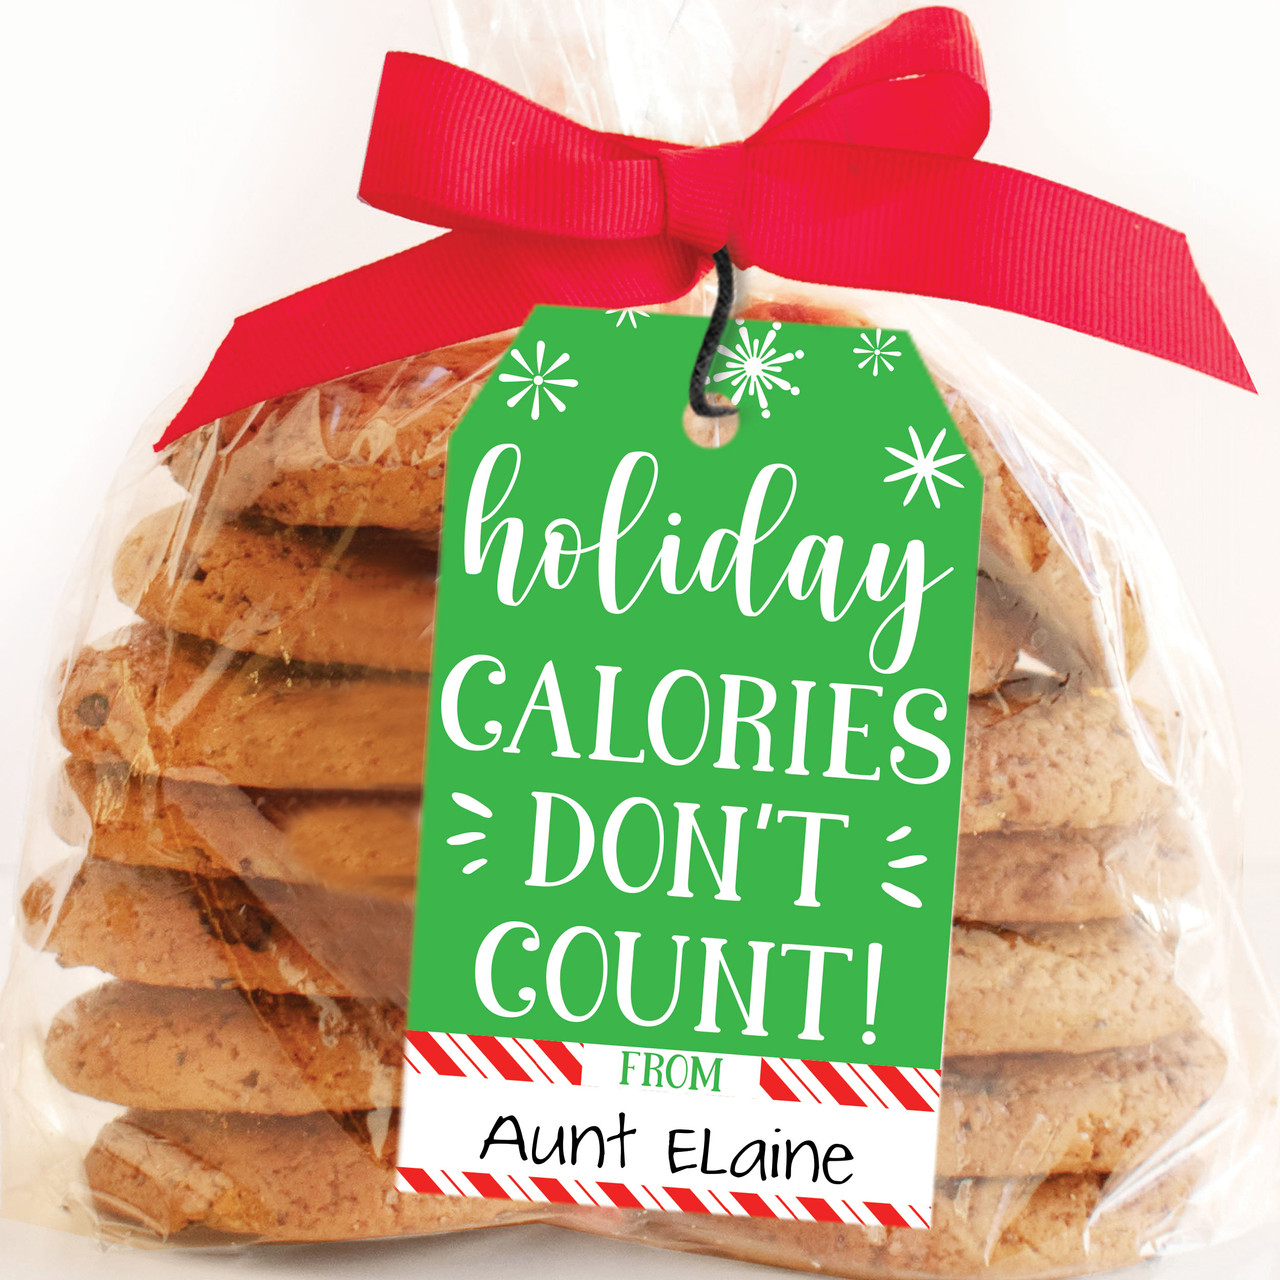 https://cdn11.bigcommerce.com/s-5grzuu6/images/stencil/1280x1280/products/5963/44331/Holiday-Calories-Funny-Christmas_Cookie_Gift_Hang-Tags__13067.1681854839.jpg?c=2